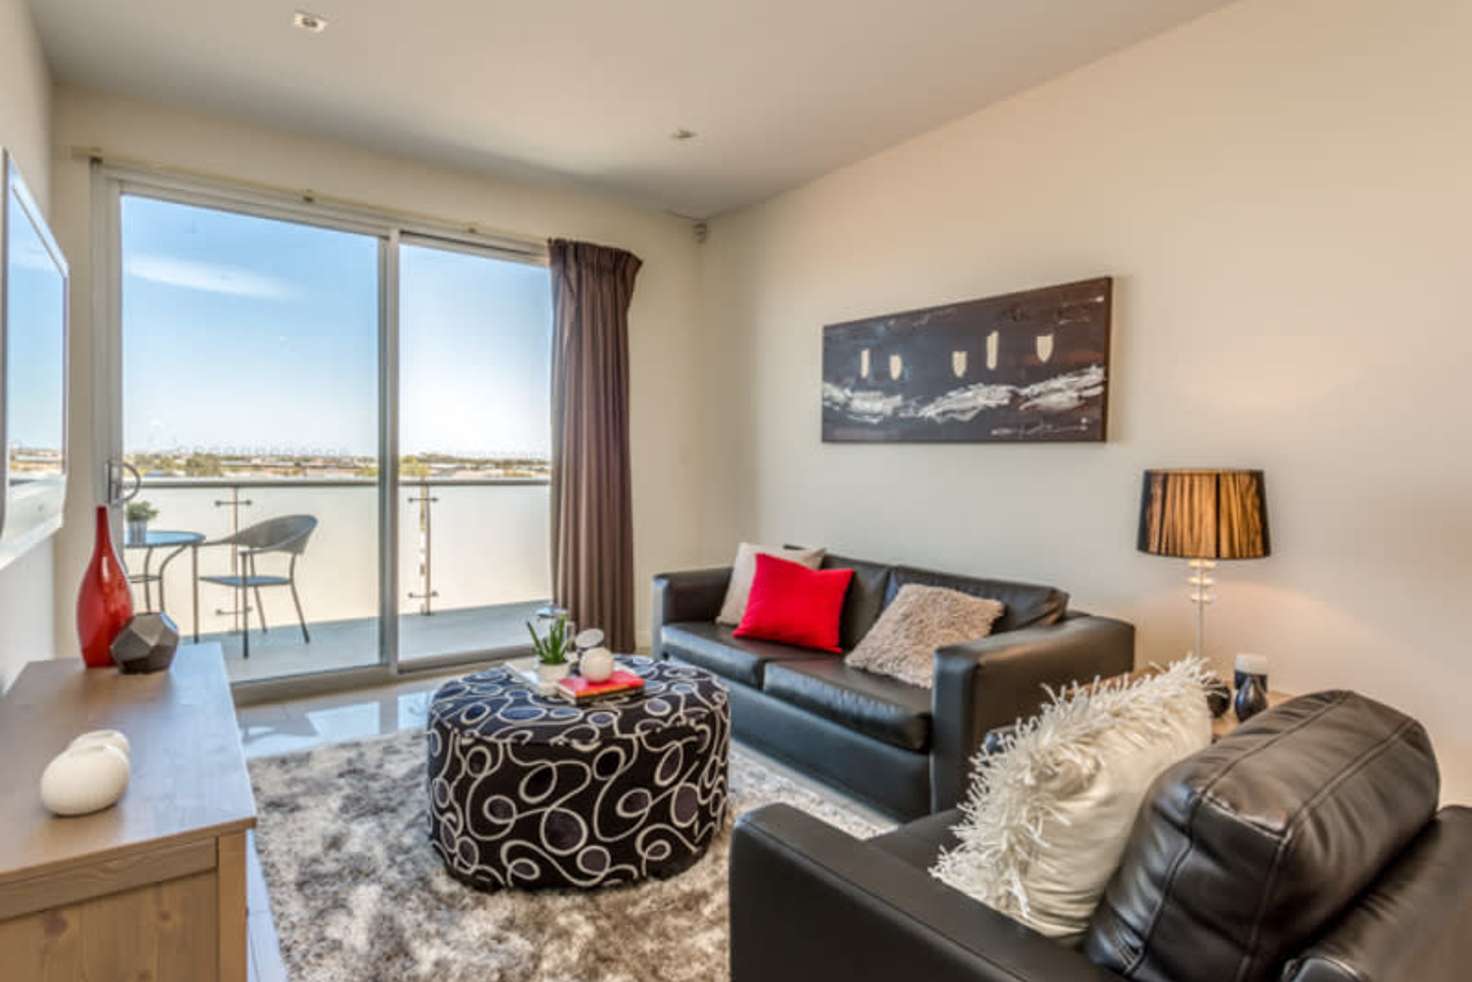 Main view of Homely apartment listing, 313/42-48 Garden Terrace, Mawson Lakes SA 5095